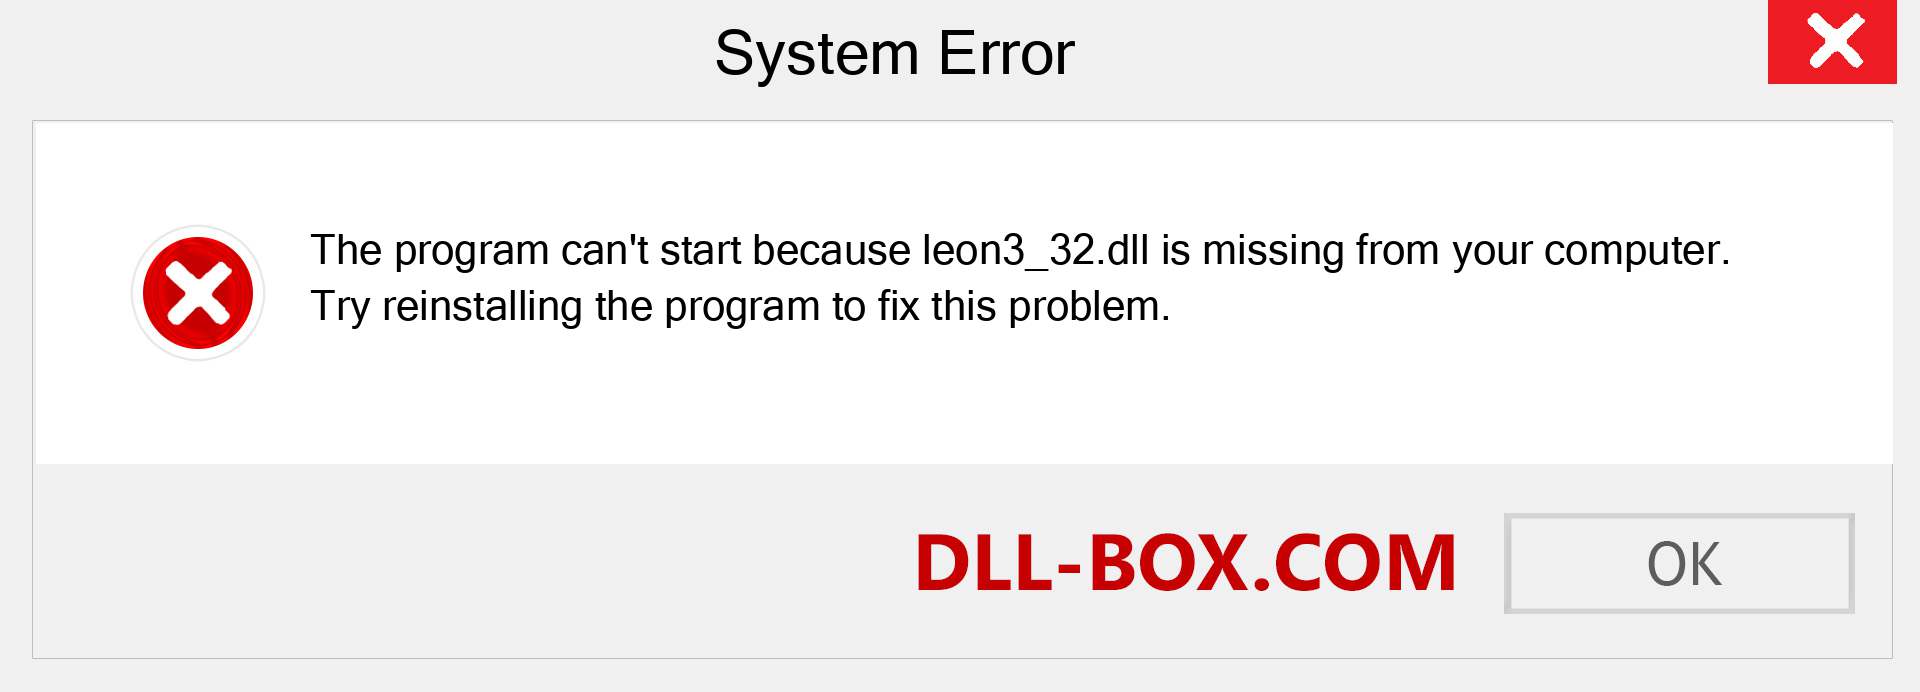  leon3_32.dll file is missing?. Download for Windows 7, 8, 10 - Fix  leon3_32 dll Missing Error on Windows, photos, images